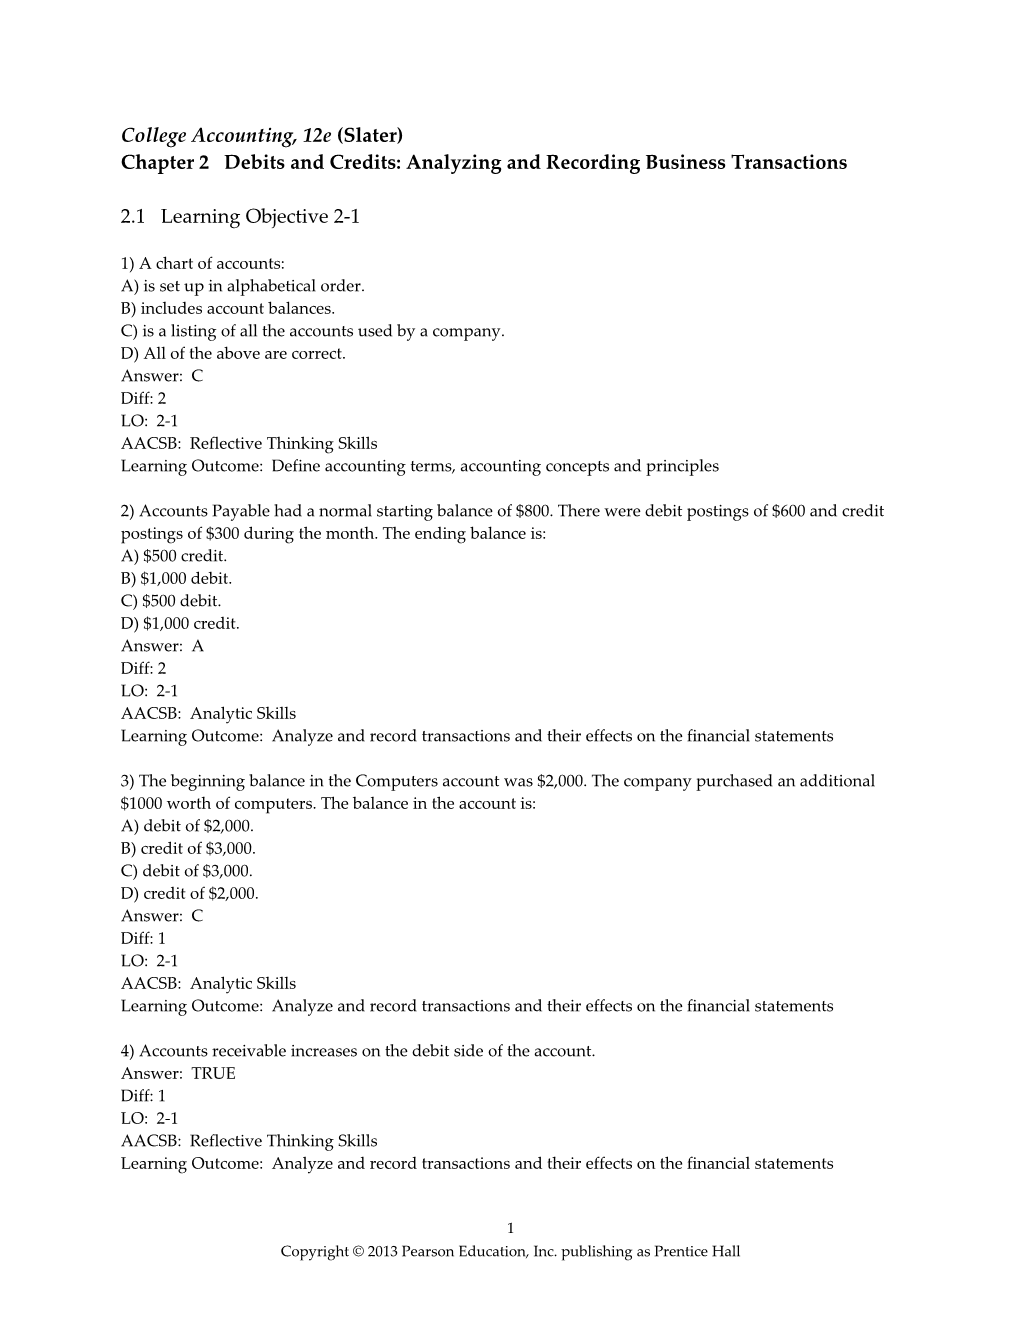 Chapter 2 Debits and Credits: Analyzing and Recording Business Transactions